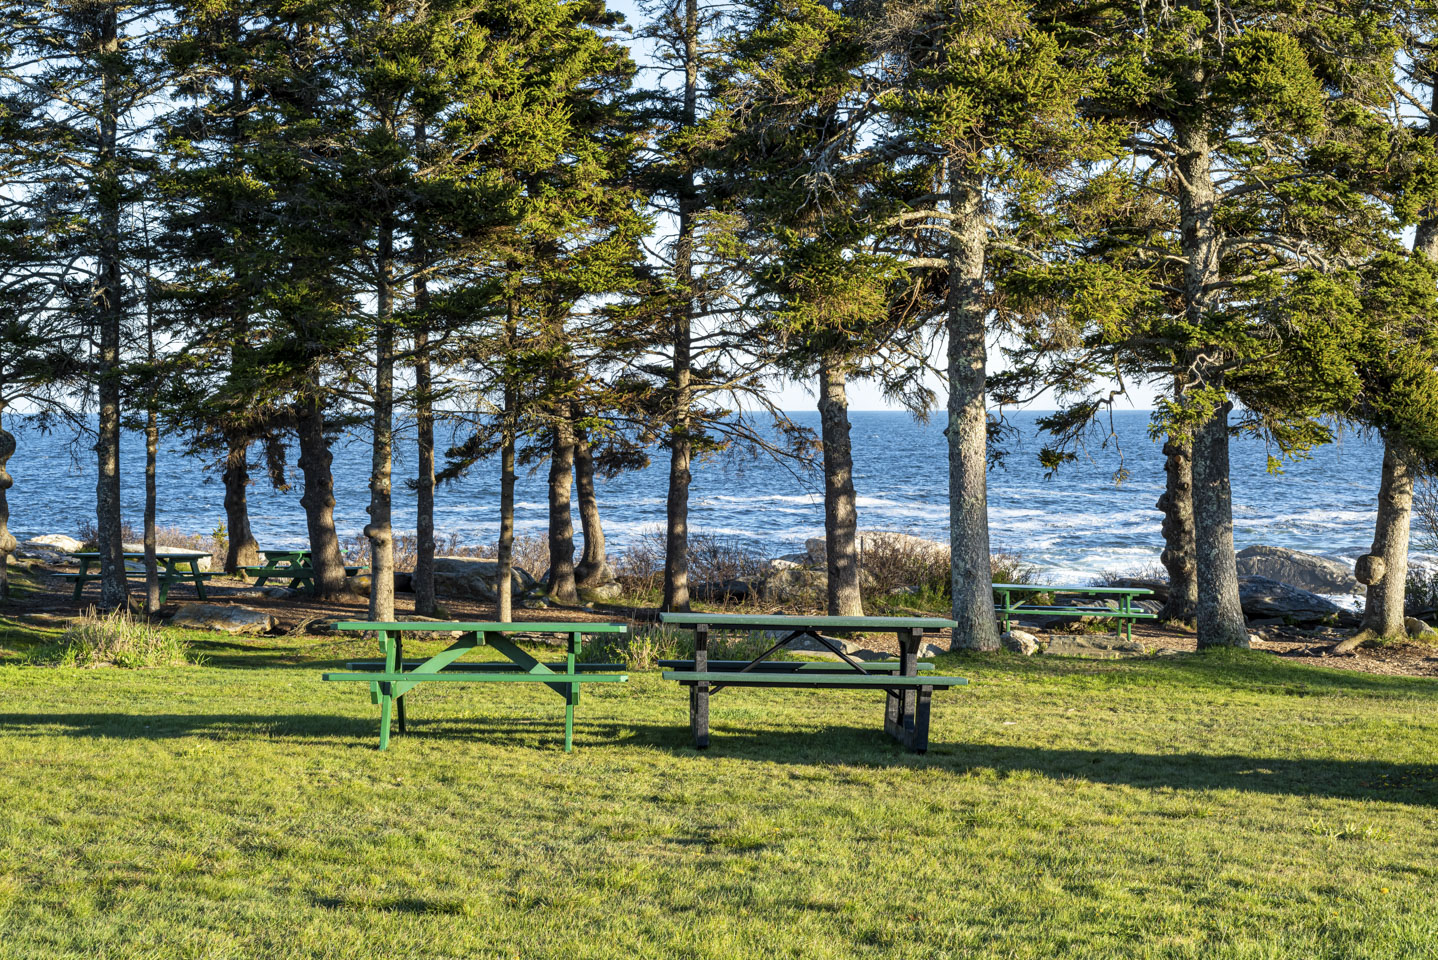 picnic benches at Pemaquid Lighthouse